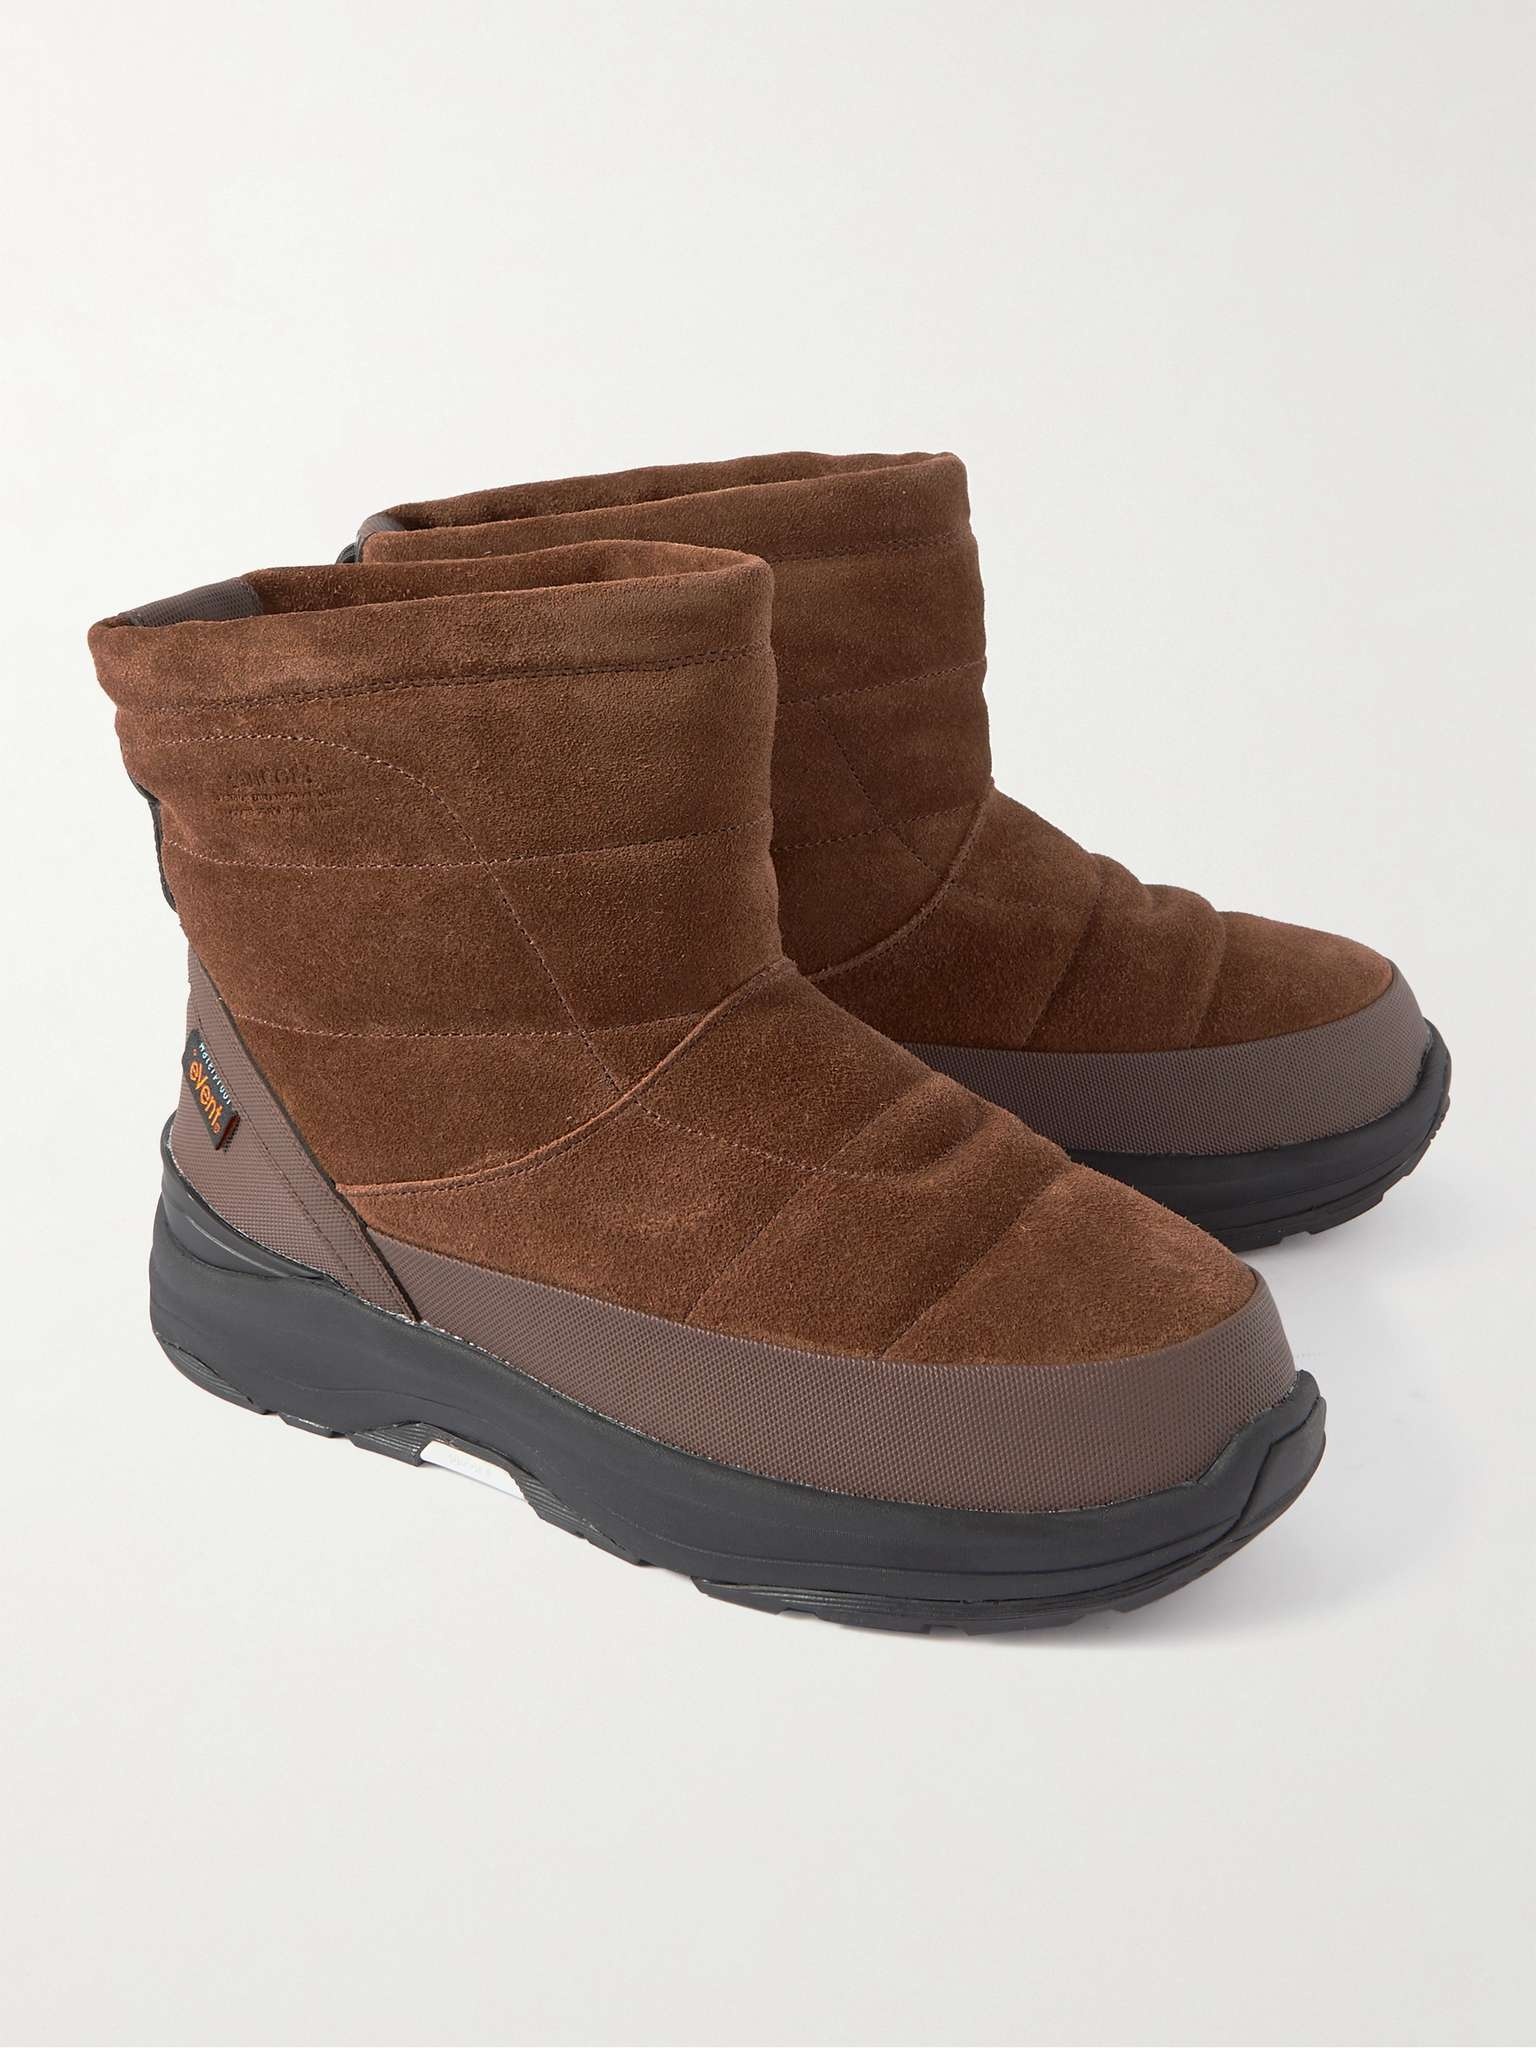 Bower-Sev Rubber-Trimmed Quilted Suede Boots - 4